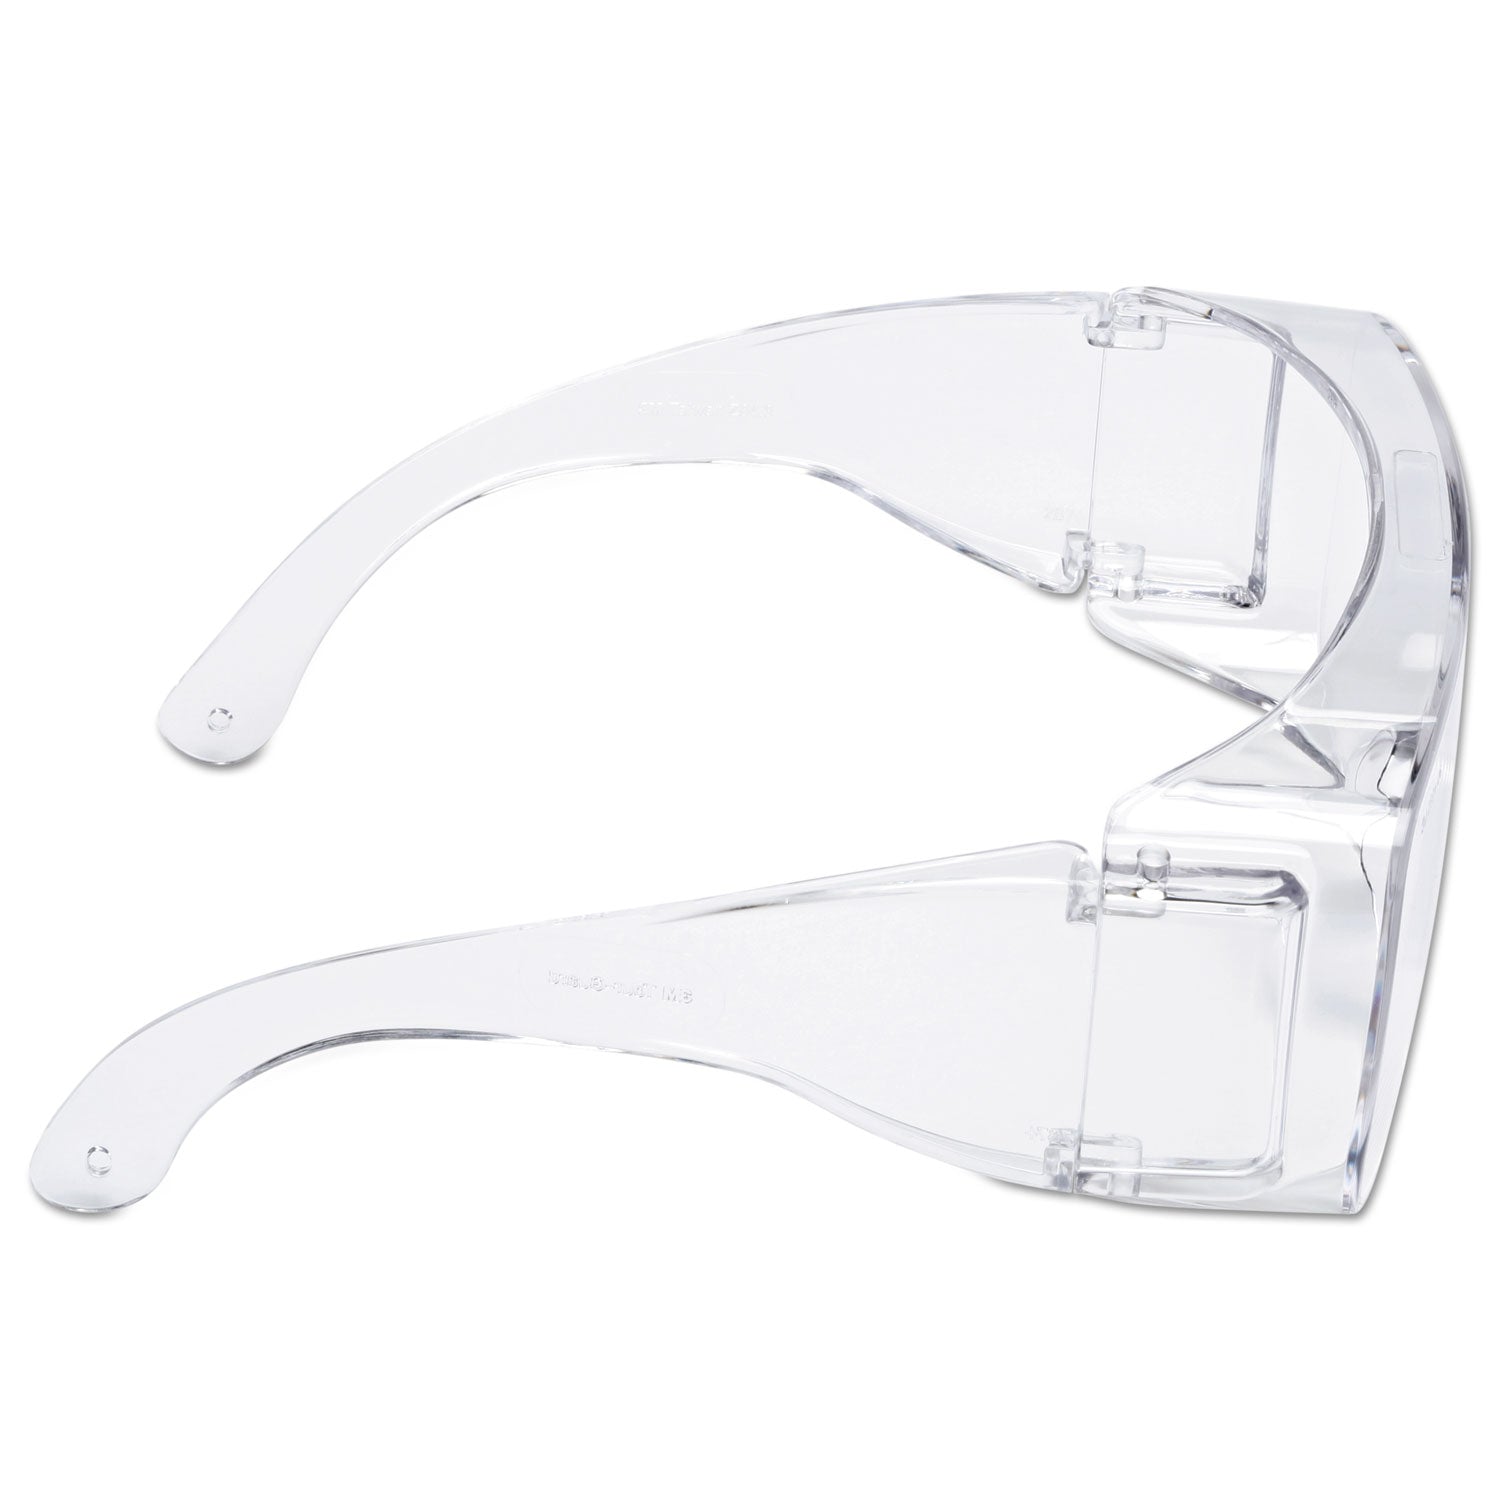 tour-guard-v-safety-glasses-one-size-fits-most-clear-frame-lens-20-box_mmmtgv0120 - 4